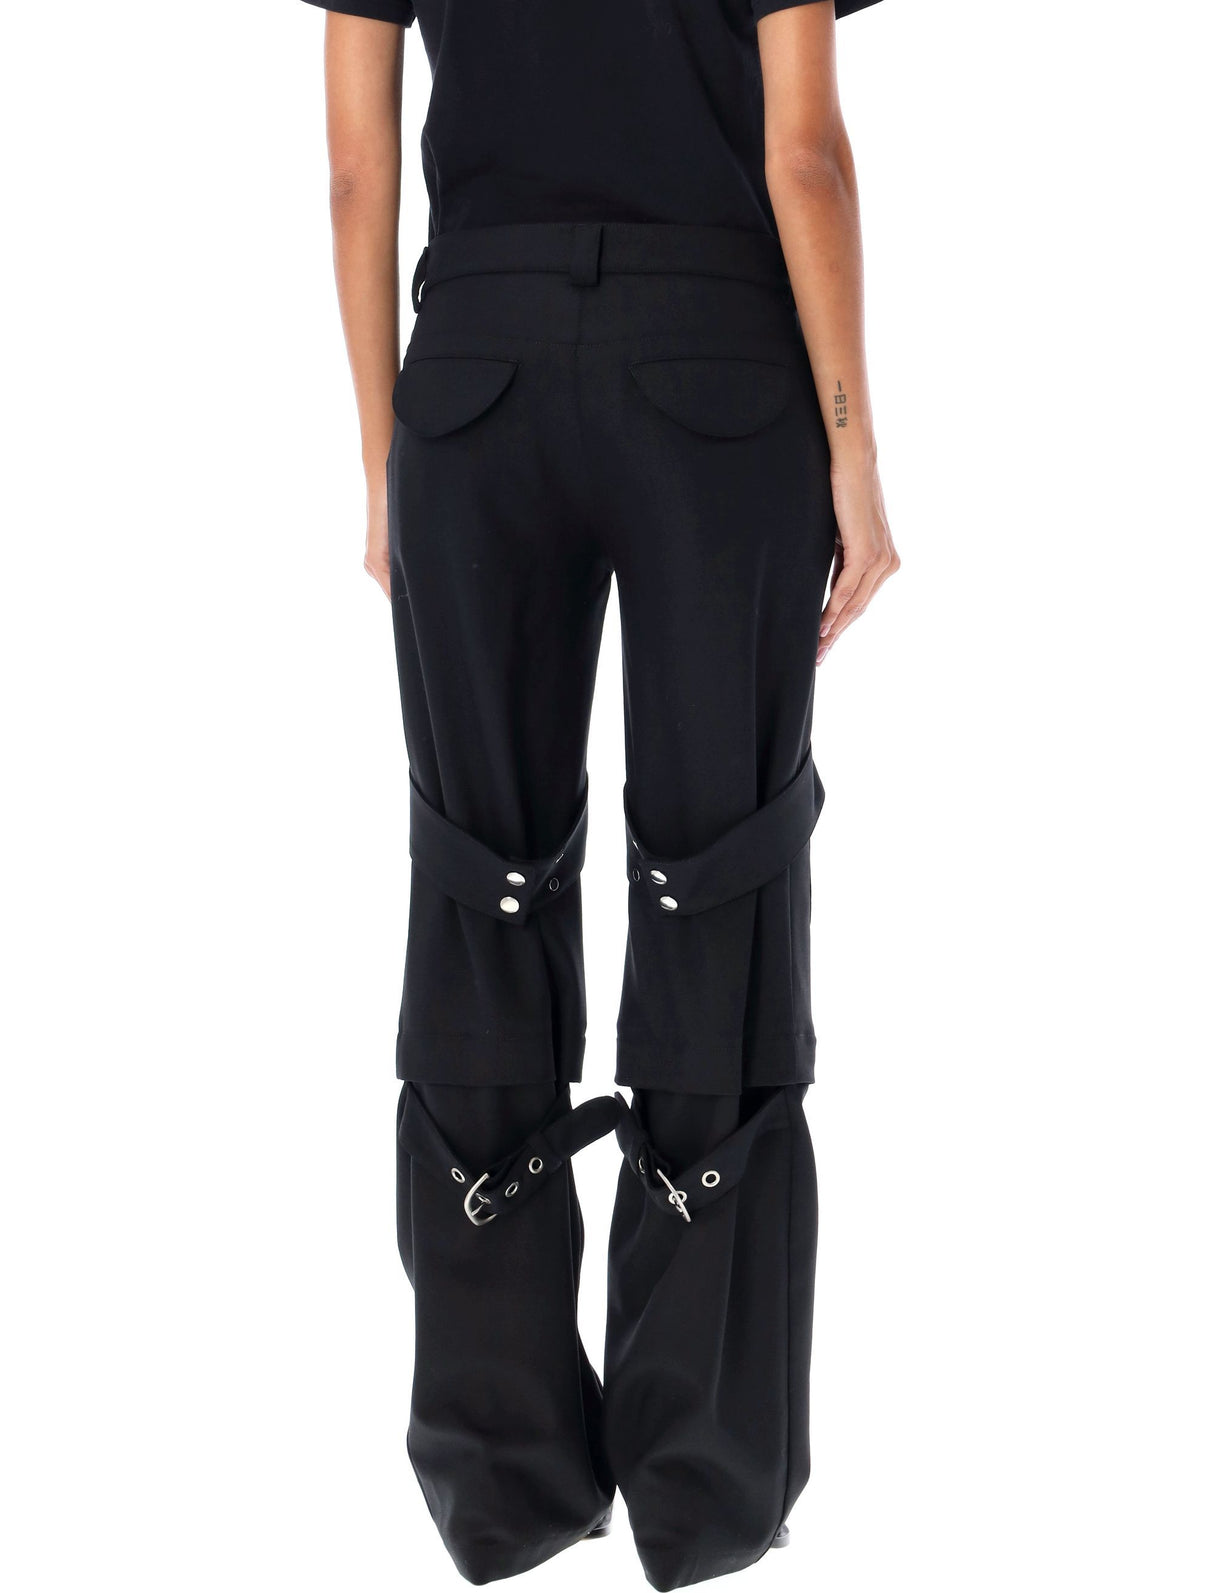 OFF-WHITE Black Cargo Zip Pants for Women - FW23 Collection